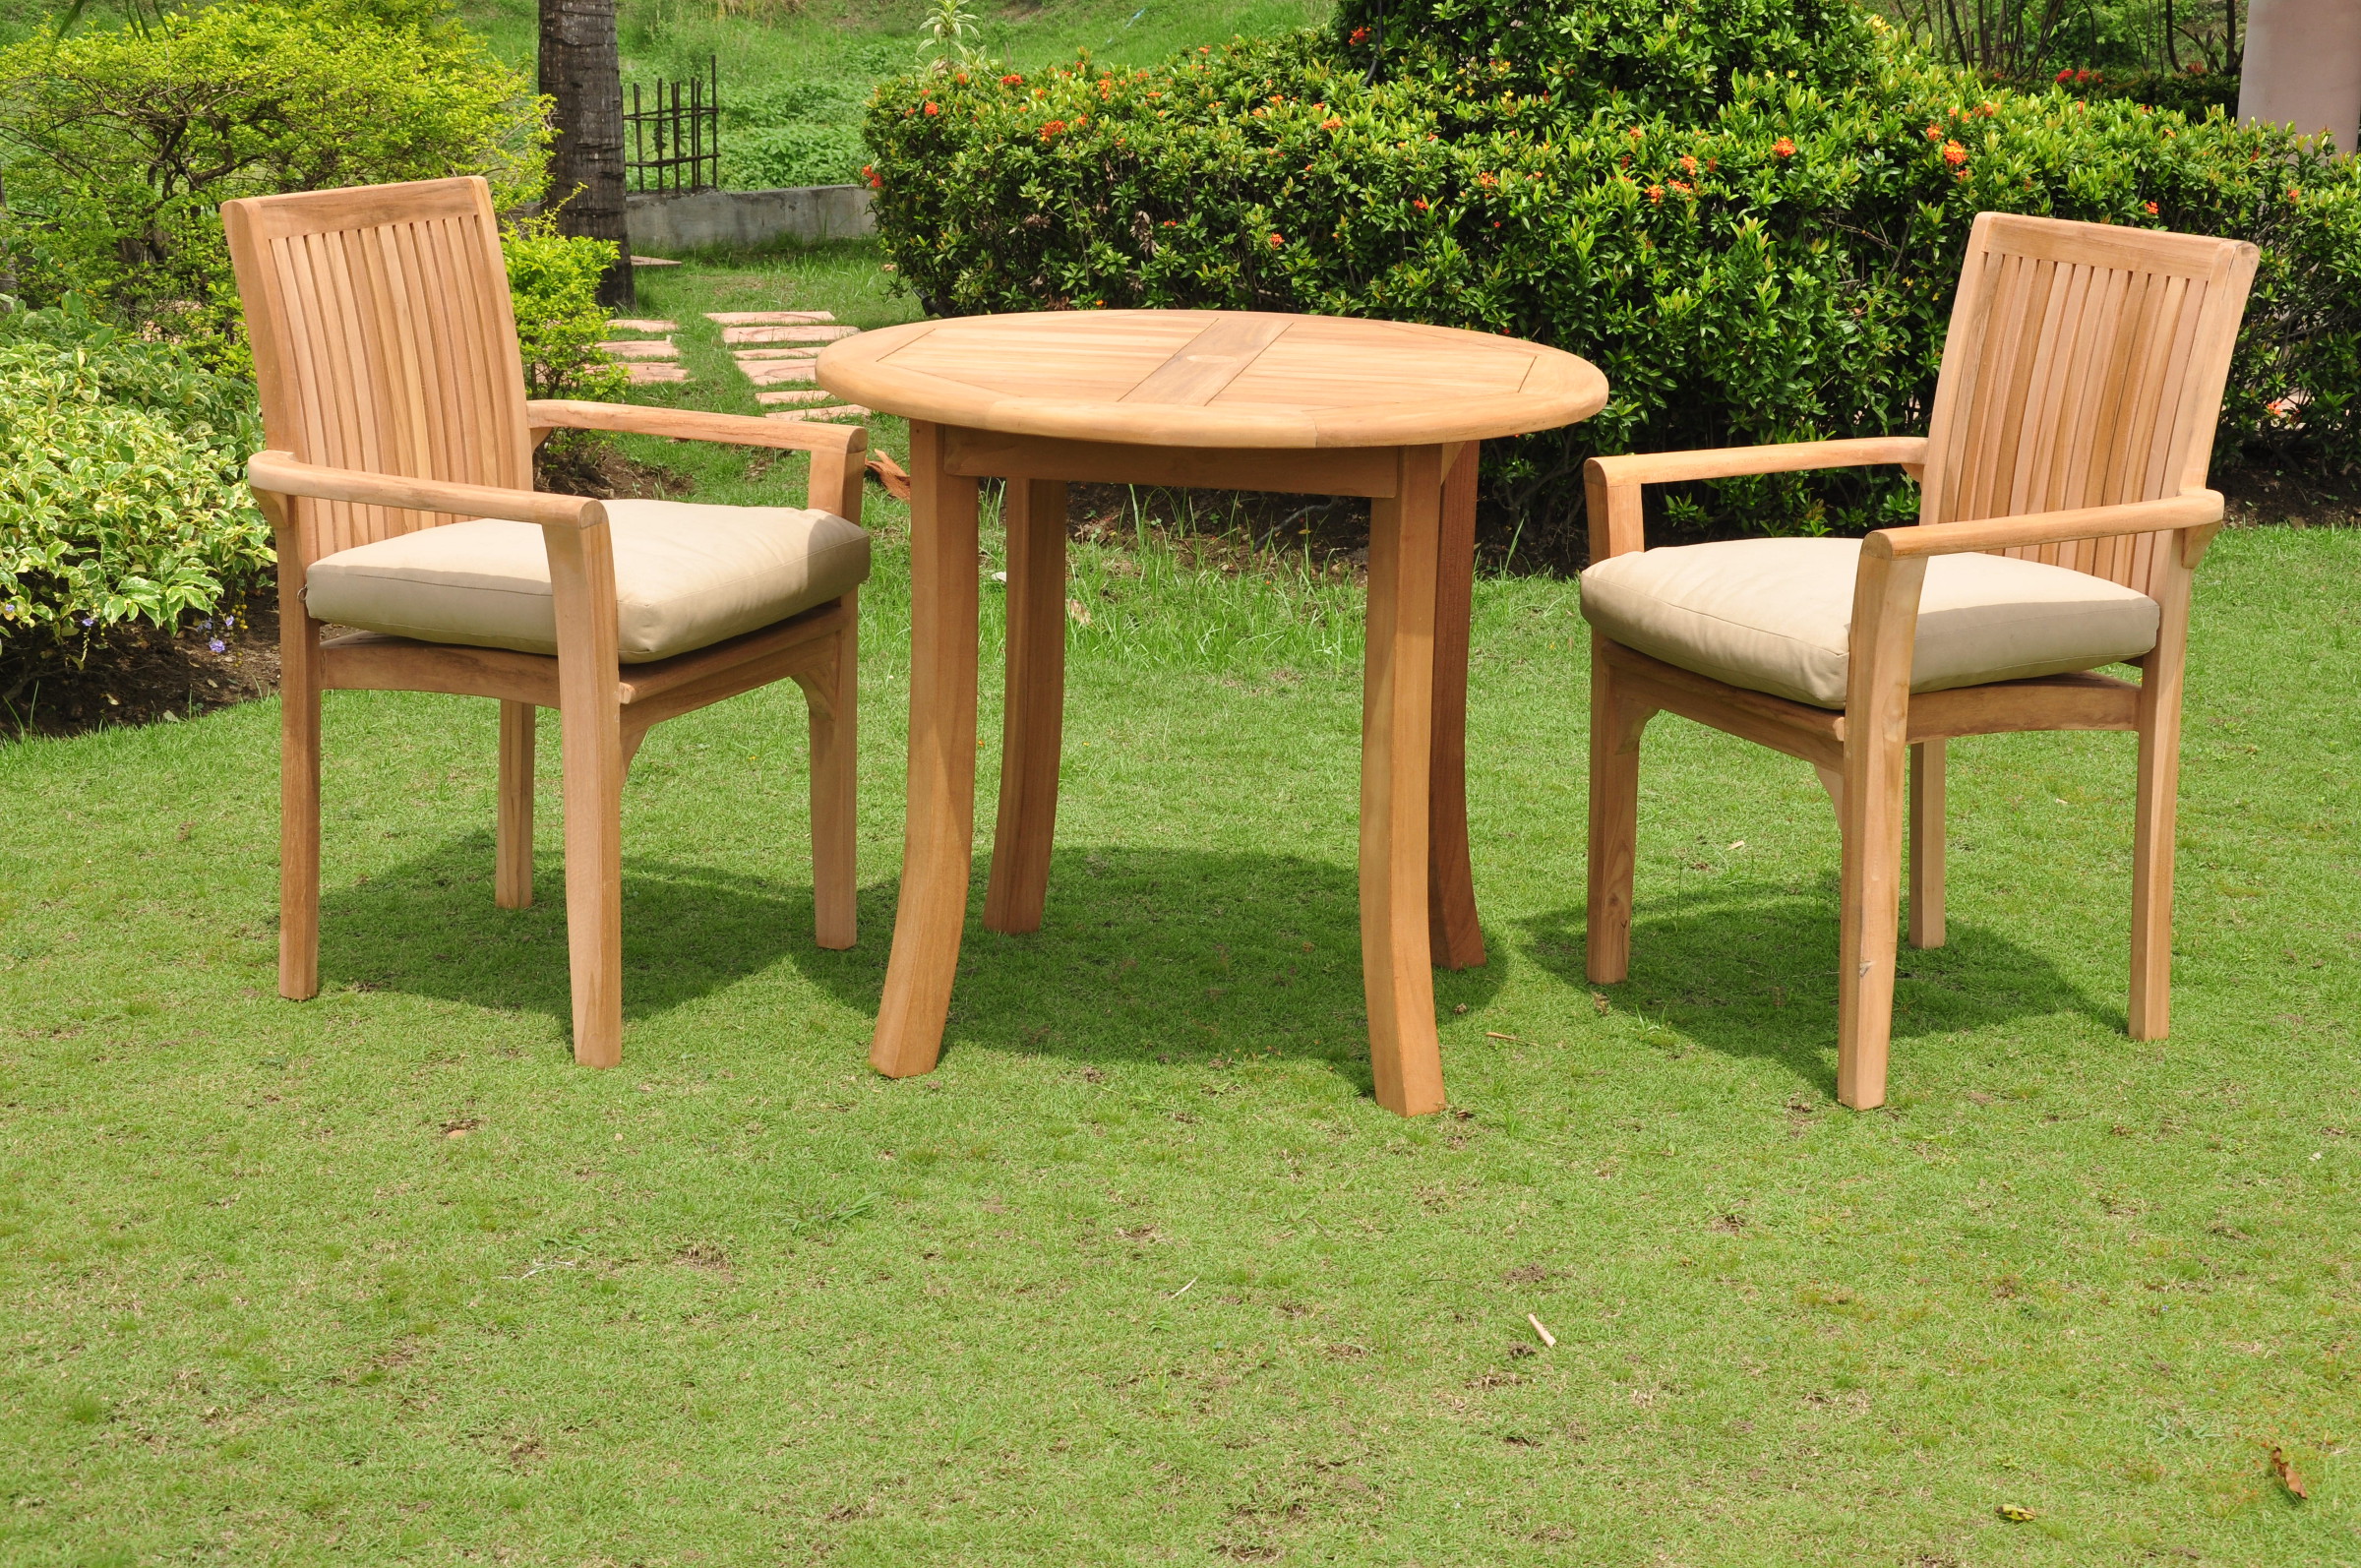 Teak Dining Set:2 Seater 3 Pc -36" Round Table And 2 Lua Stacking Arm Chairs Outdoor Patio Grade-A Teak Wood WholesaleTeak #WMDSLU1 - image 4 of 4